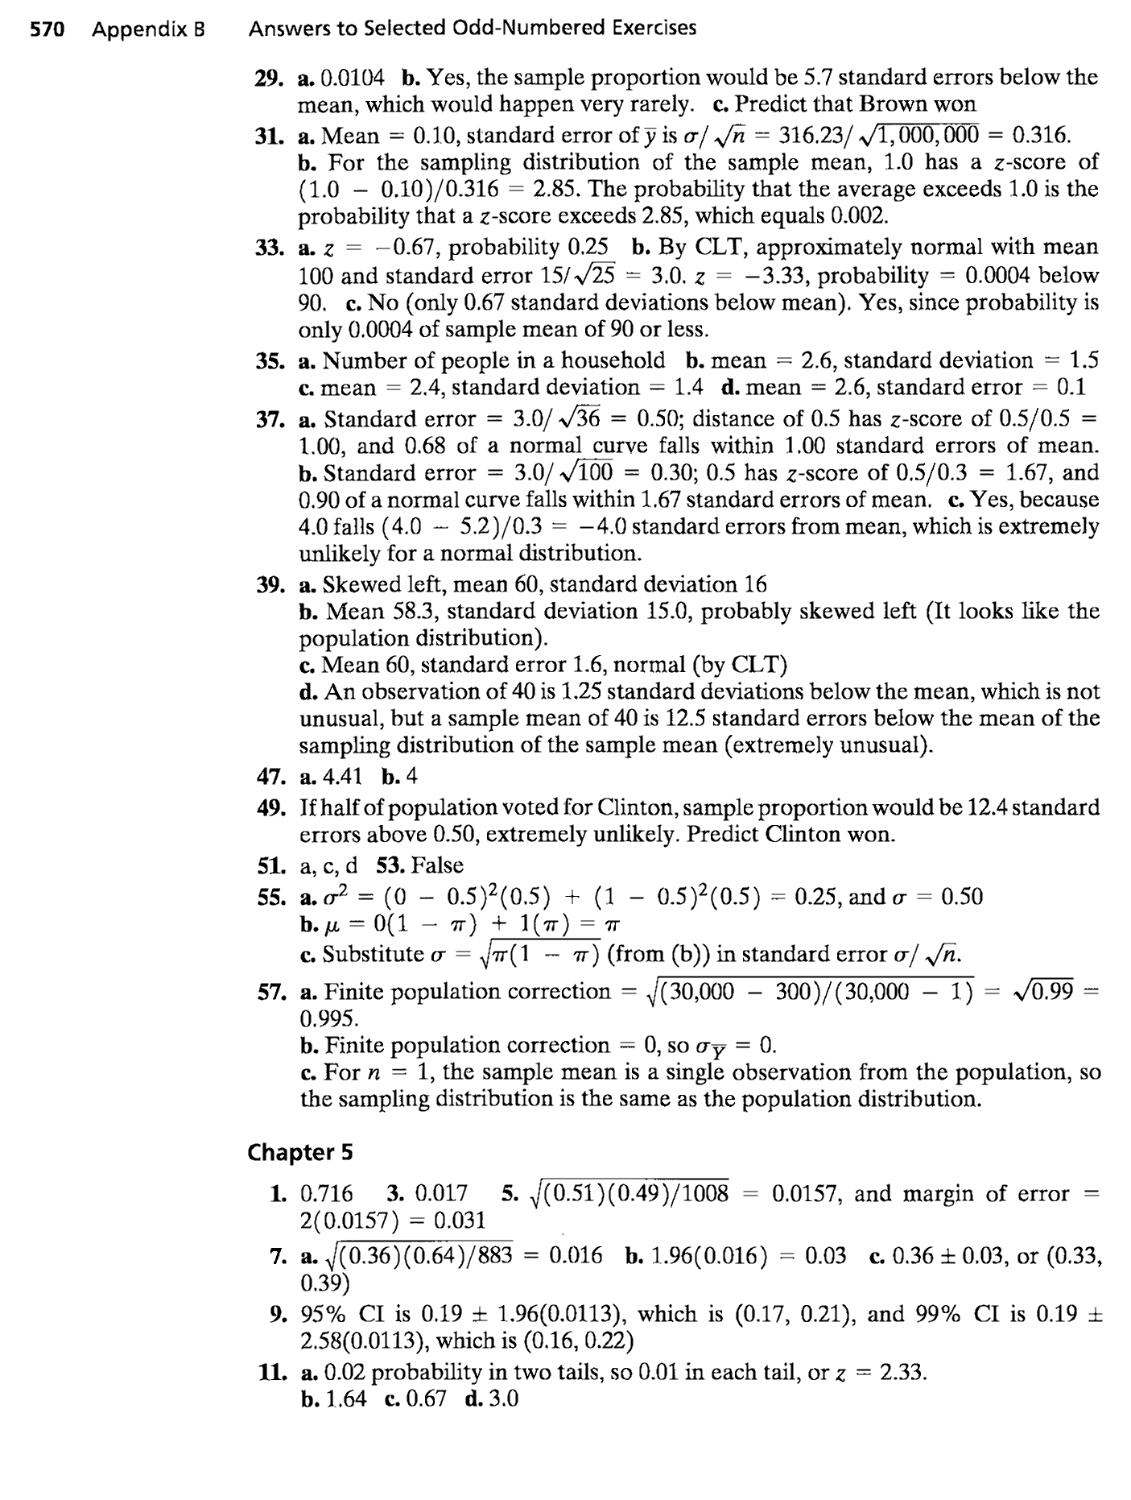 Appendix B: Answers to Selected Odd-Numbered Exercises